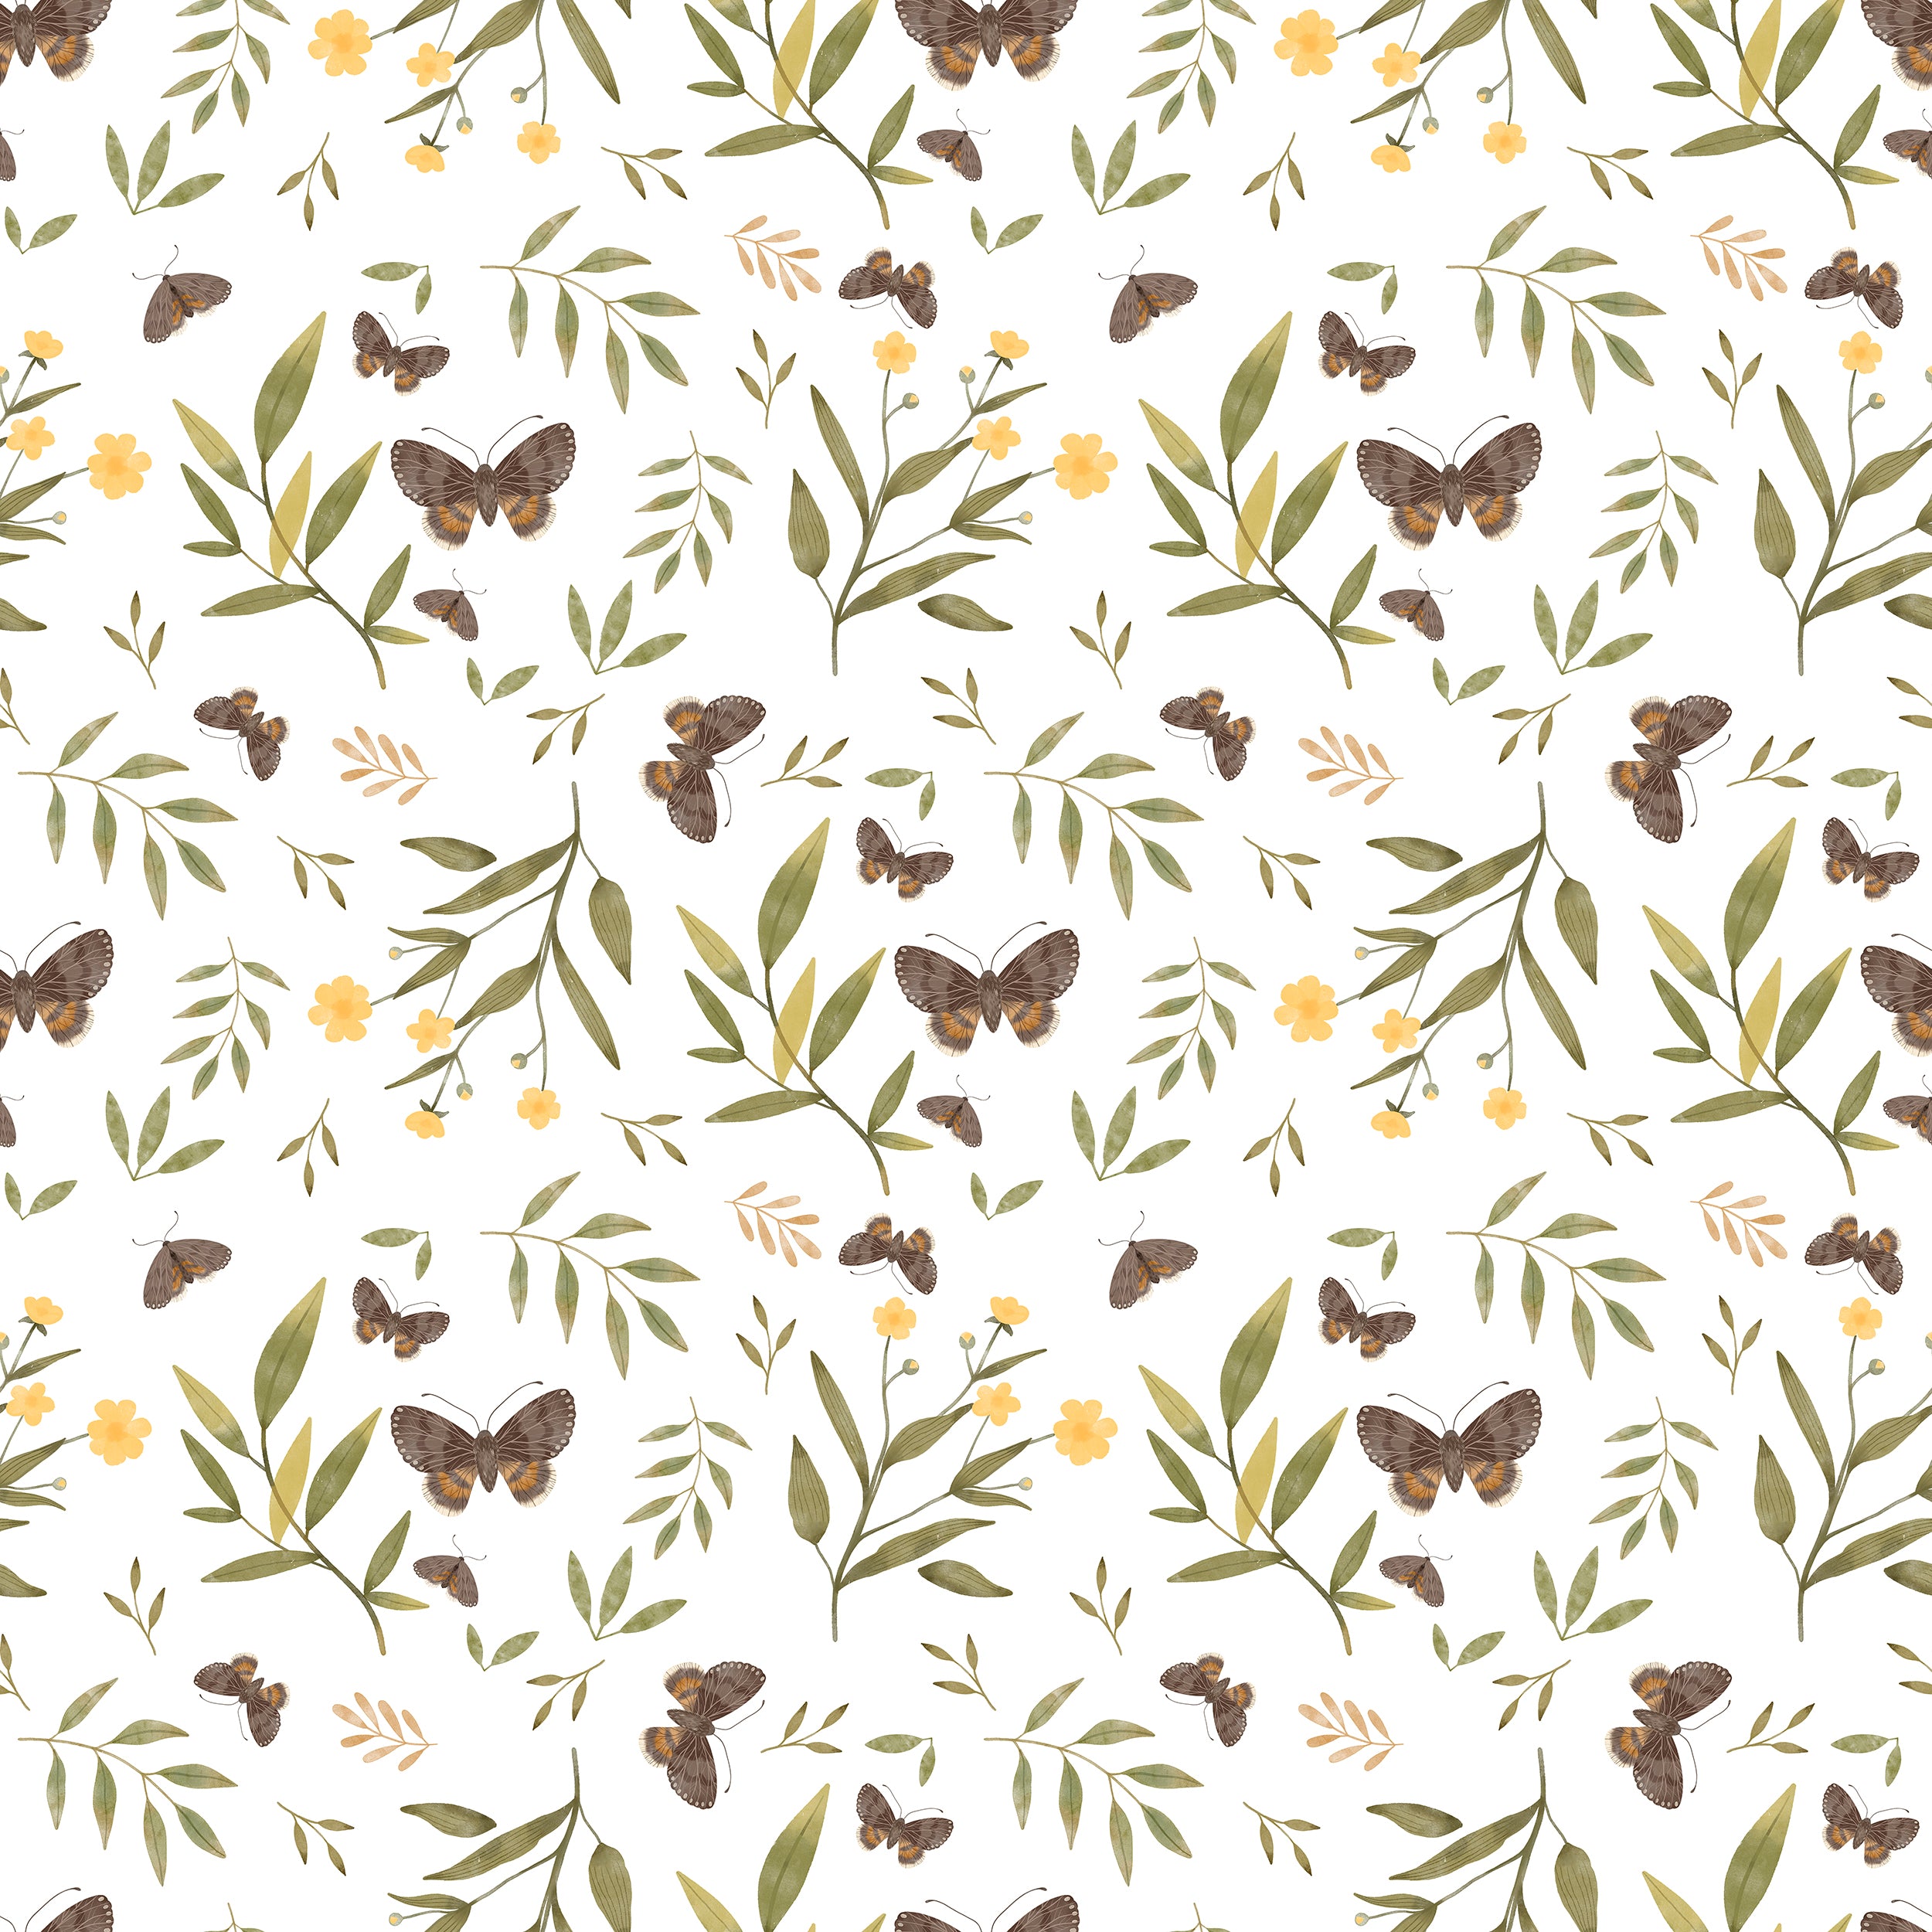 Close-up view of Forest Moth Wallpaper featuring delicate moths in various shades of brown, interspersed with green leaves and yellow flowers on a light background. This design captures the serene beauty of a woodland scene.